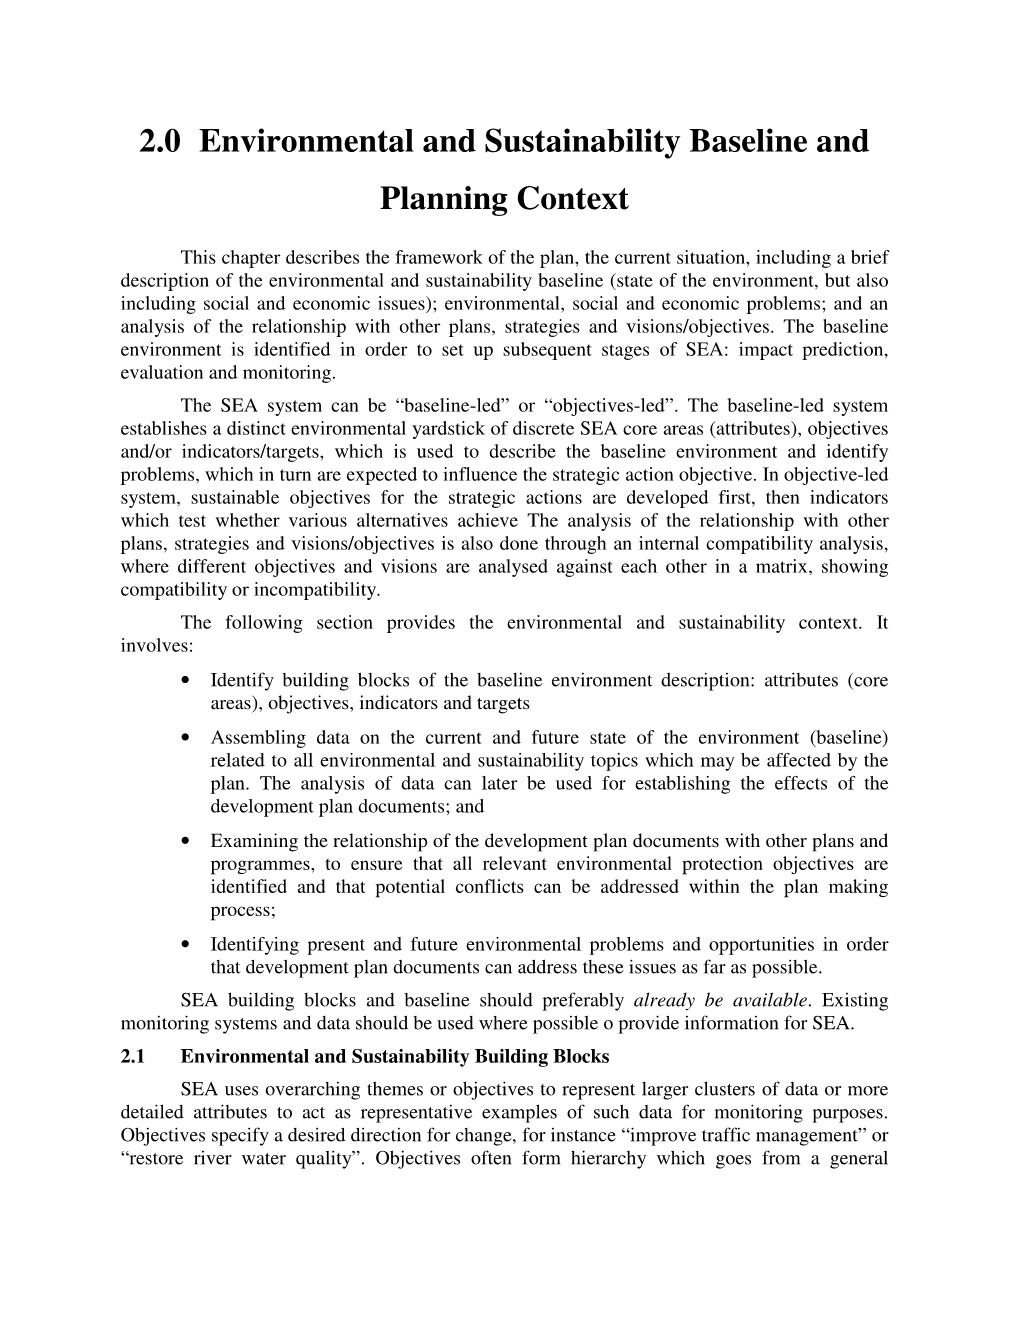 2.0 Environmental and Sustainability Baseline and Planning Context